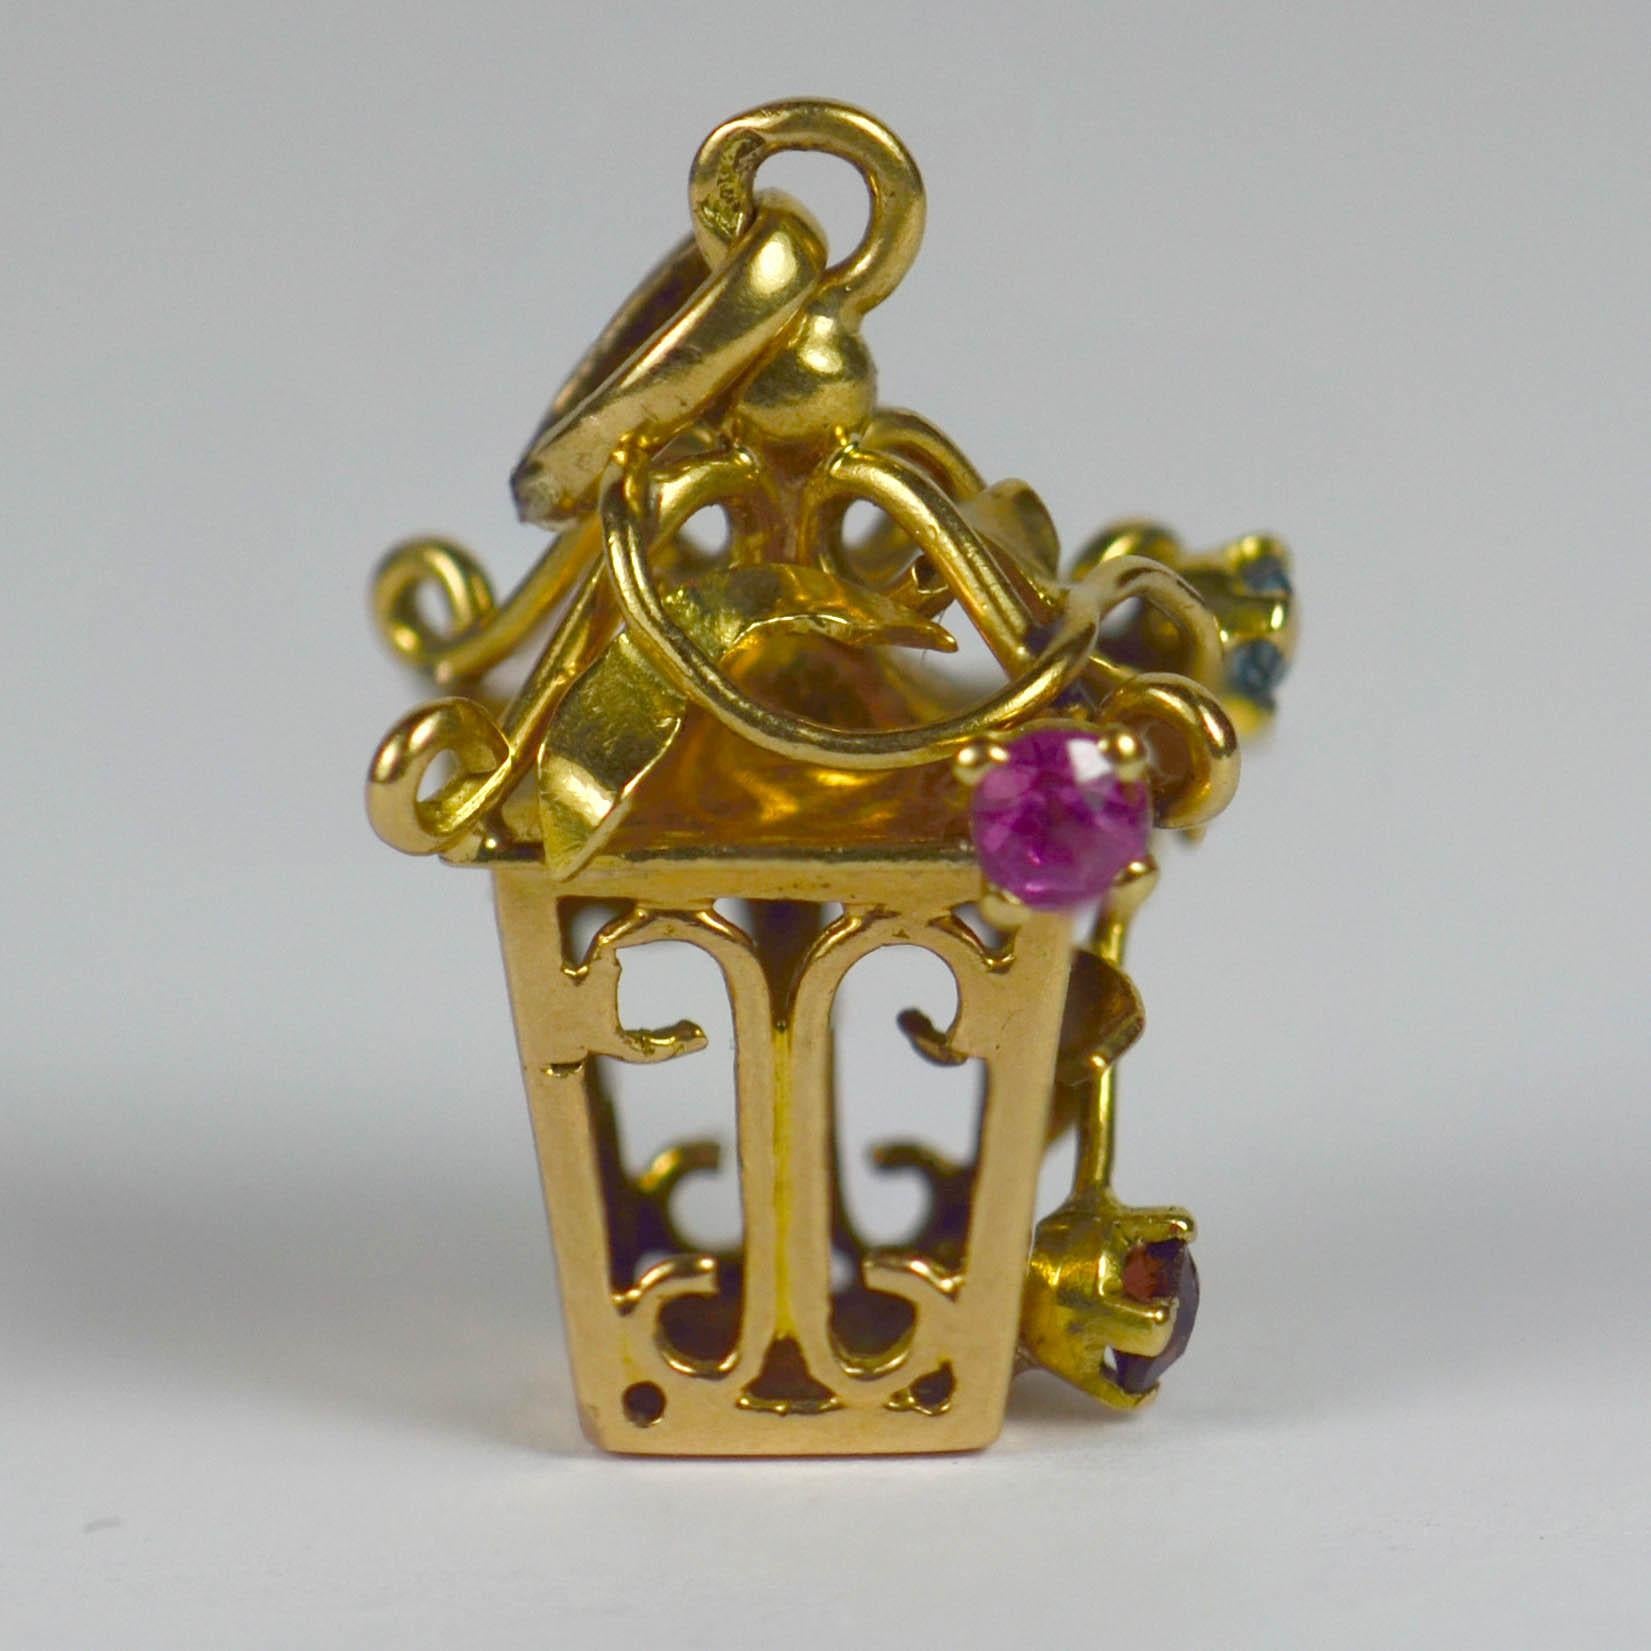 An 18 karat yellow gold French charm pendant designed as a lantern with a climbing gem set vine. Stamped with the eagle's head for French manufacture of 18 karat gold, the vine set with round cut paste stones.

Dimensions: 2 x 1.2 x 1.2 cm
Weight: